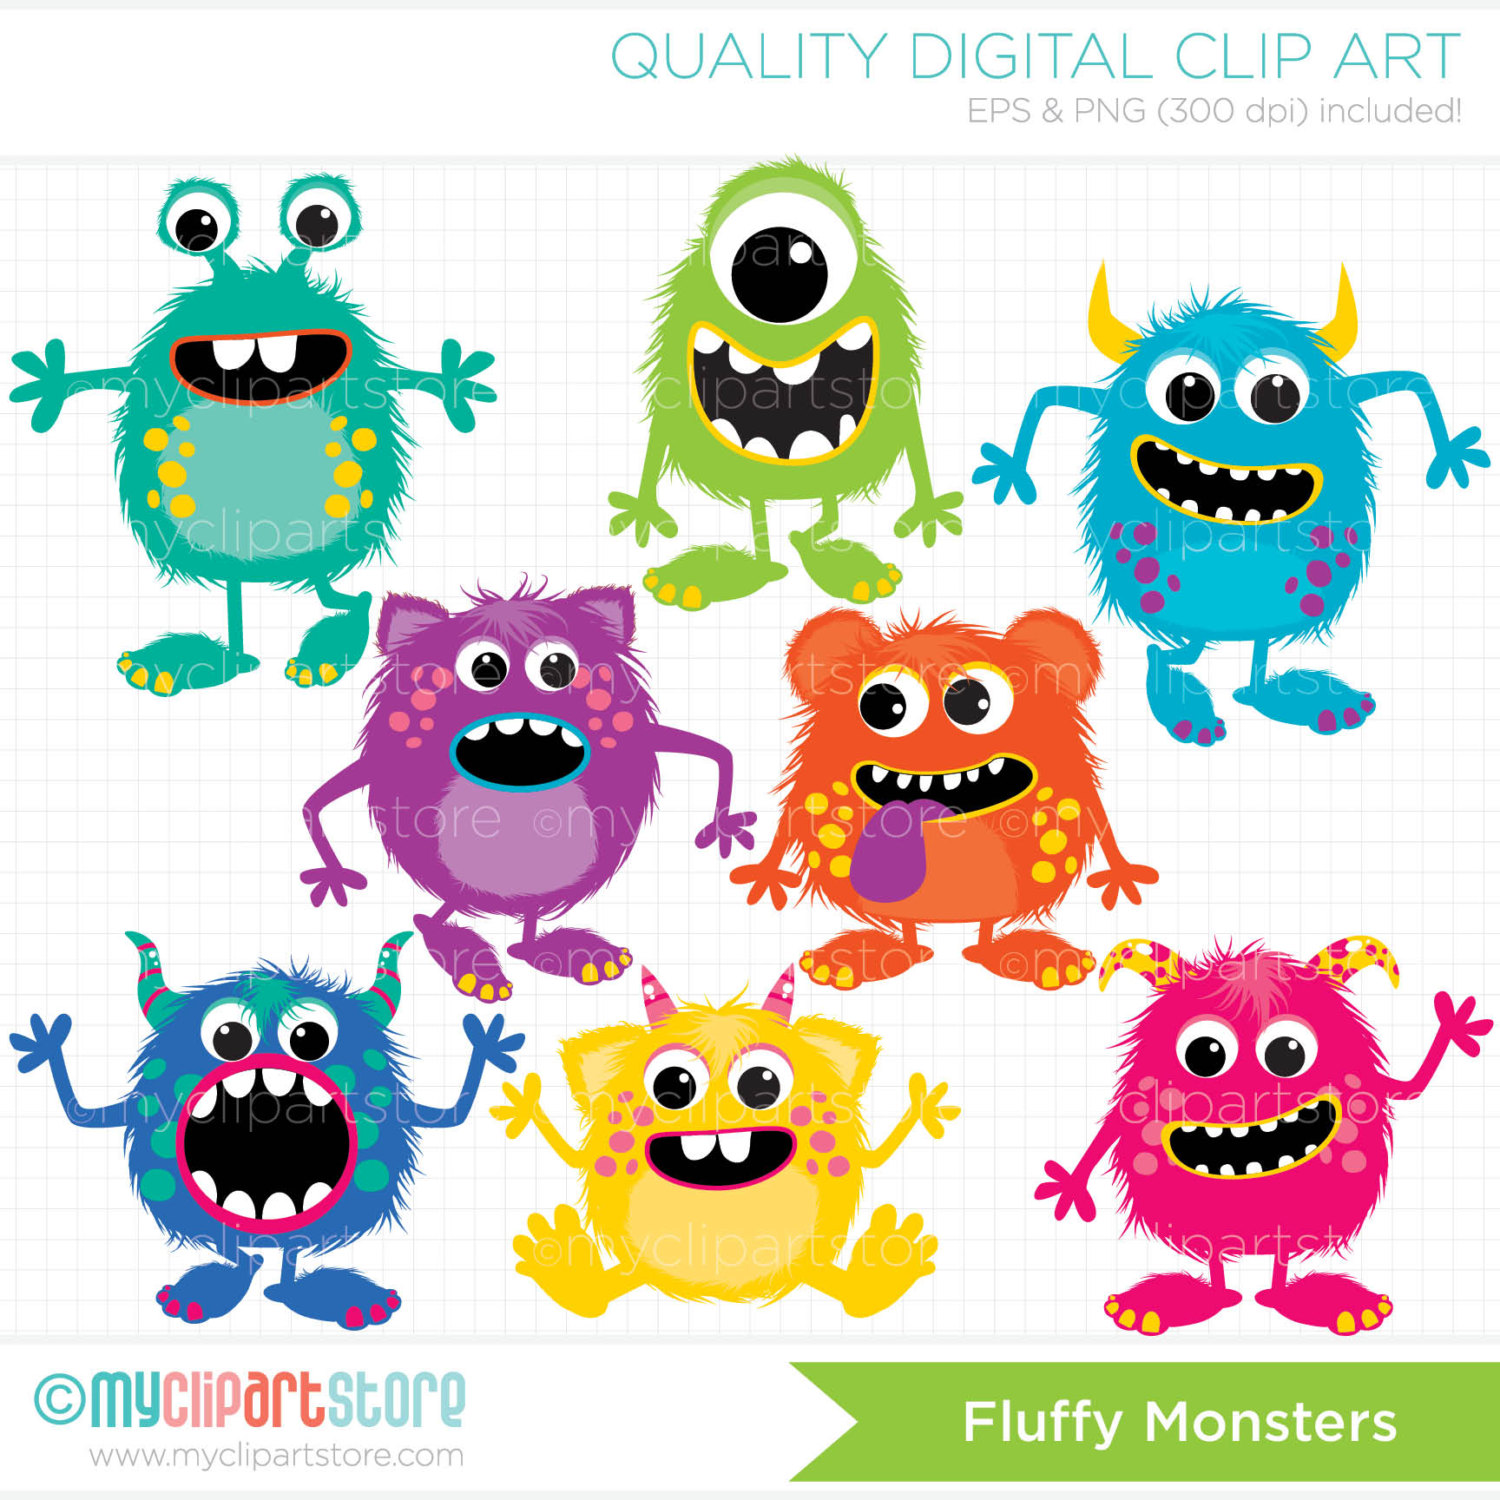 Fluffy Monsters Clip Art   Digital Clipart By Myclipartstore